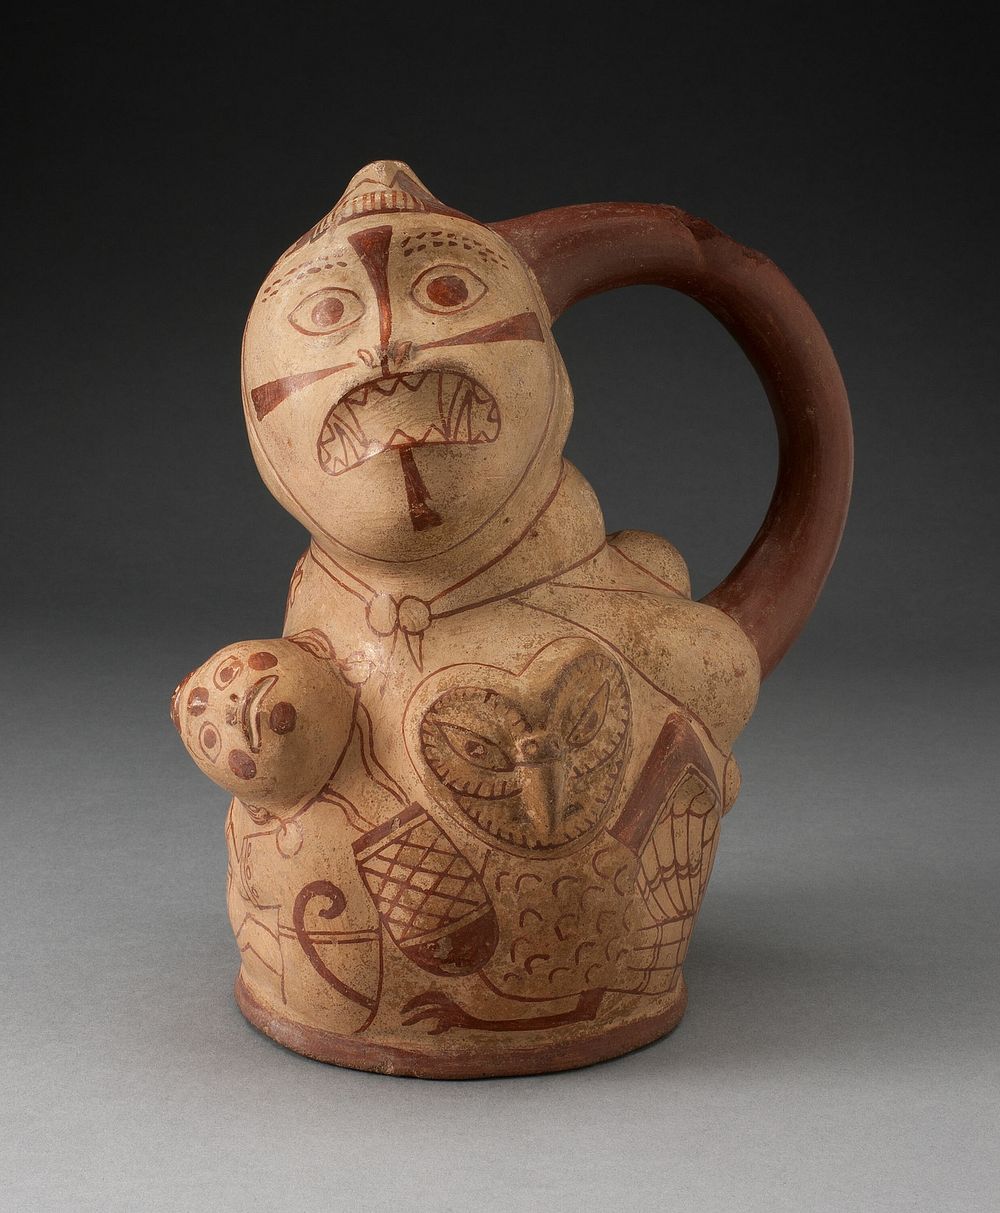 Handle Spout Vessel with Composite Relief Depicting a Human Head, Owl, and Serpent by Moche